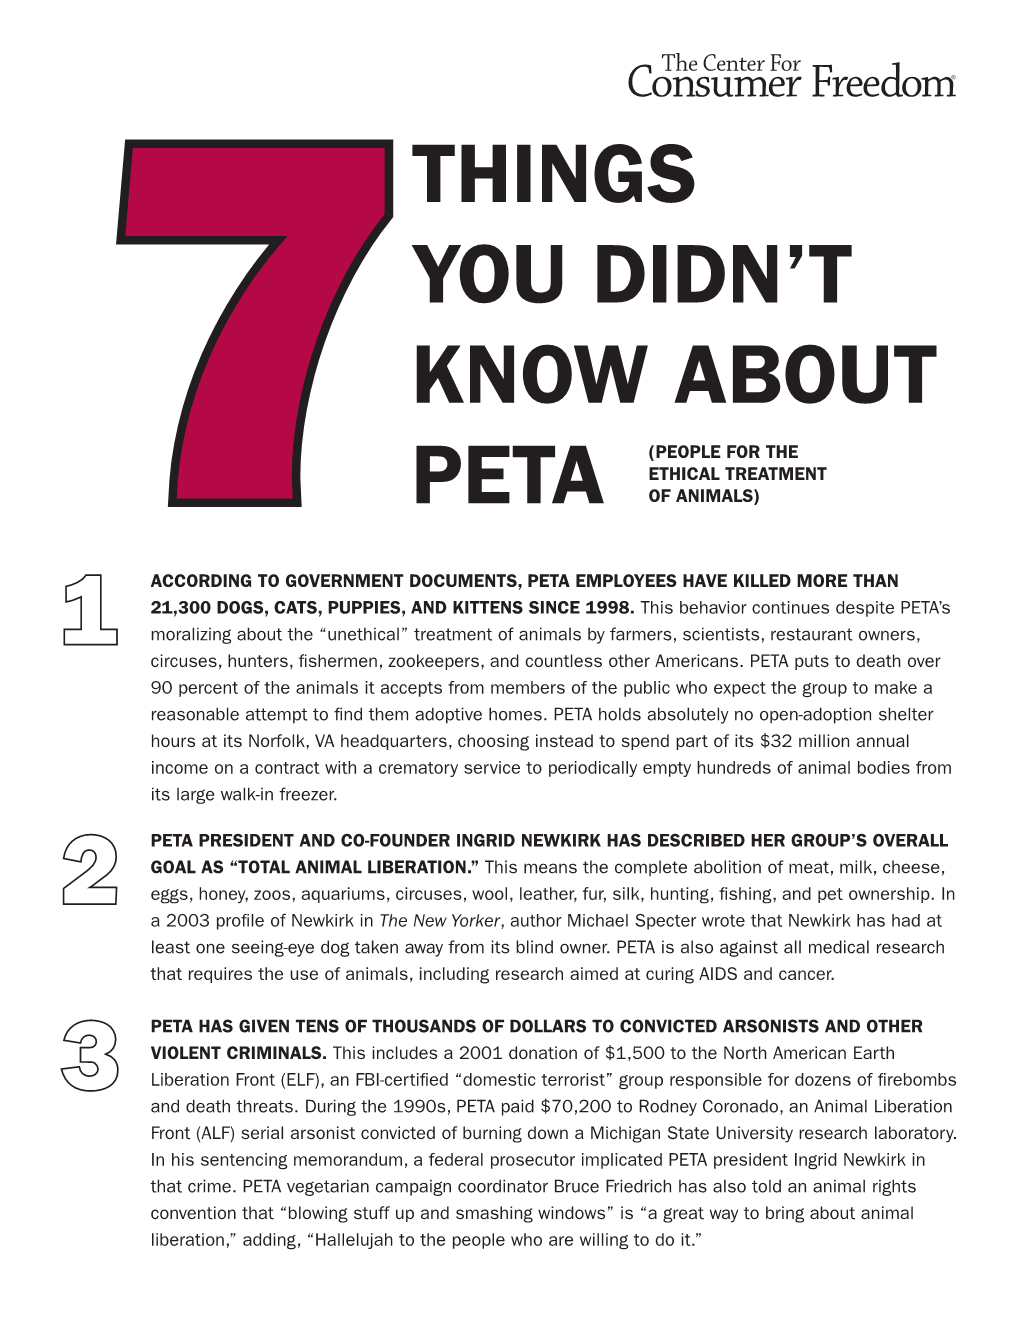 Things You Didn't Know About Peta